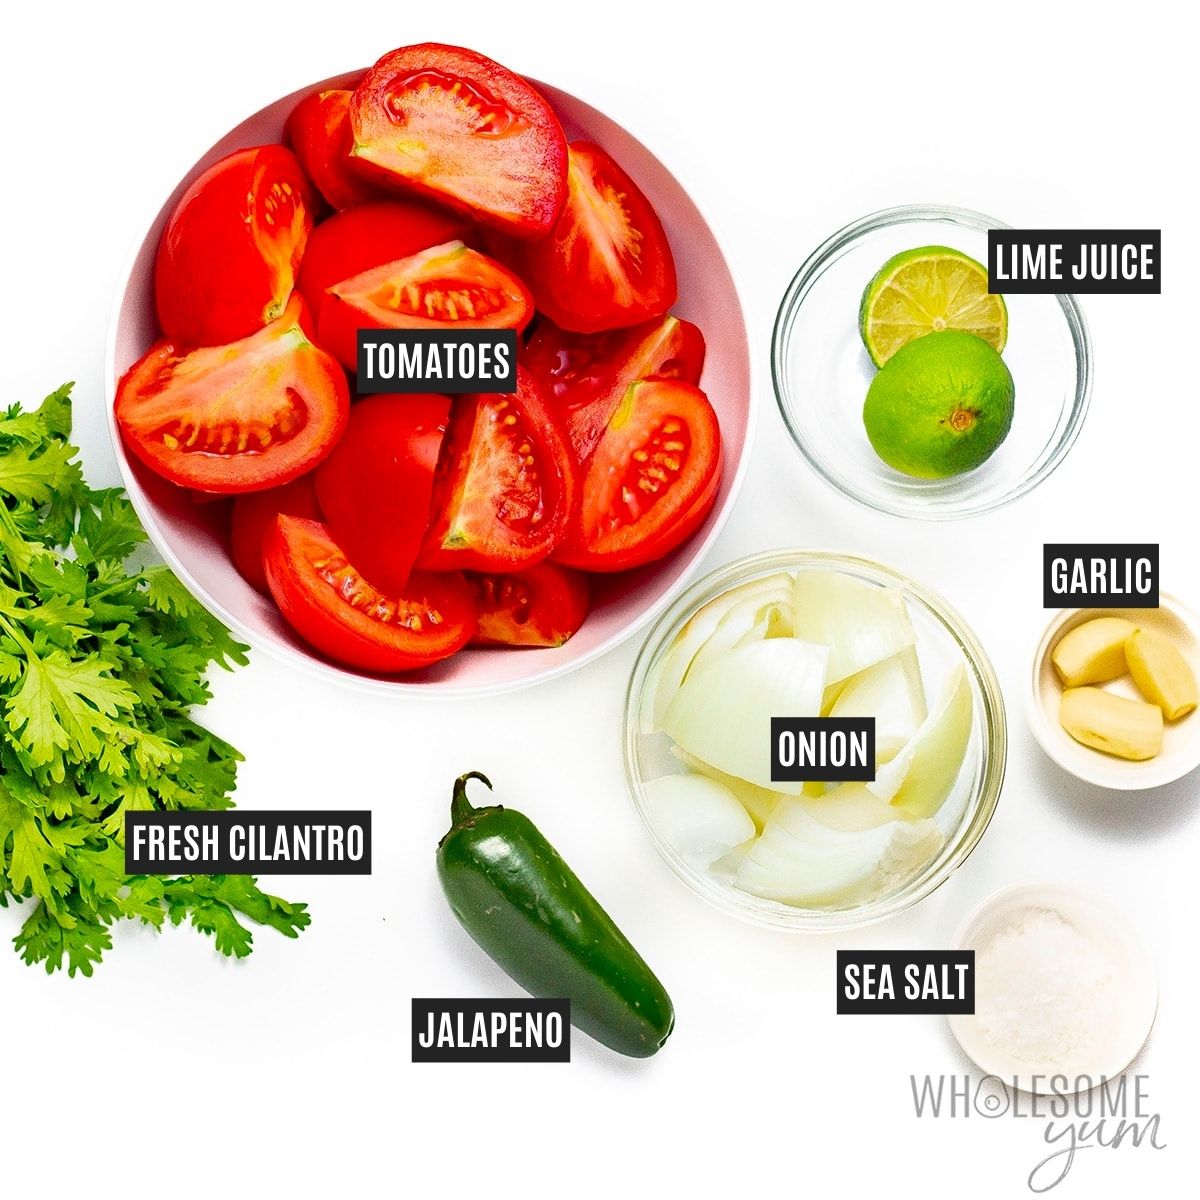 Tomatoes, onions, cilantro, limes, garlic, and salt in bowls with labels.